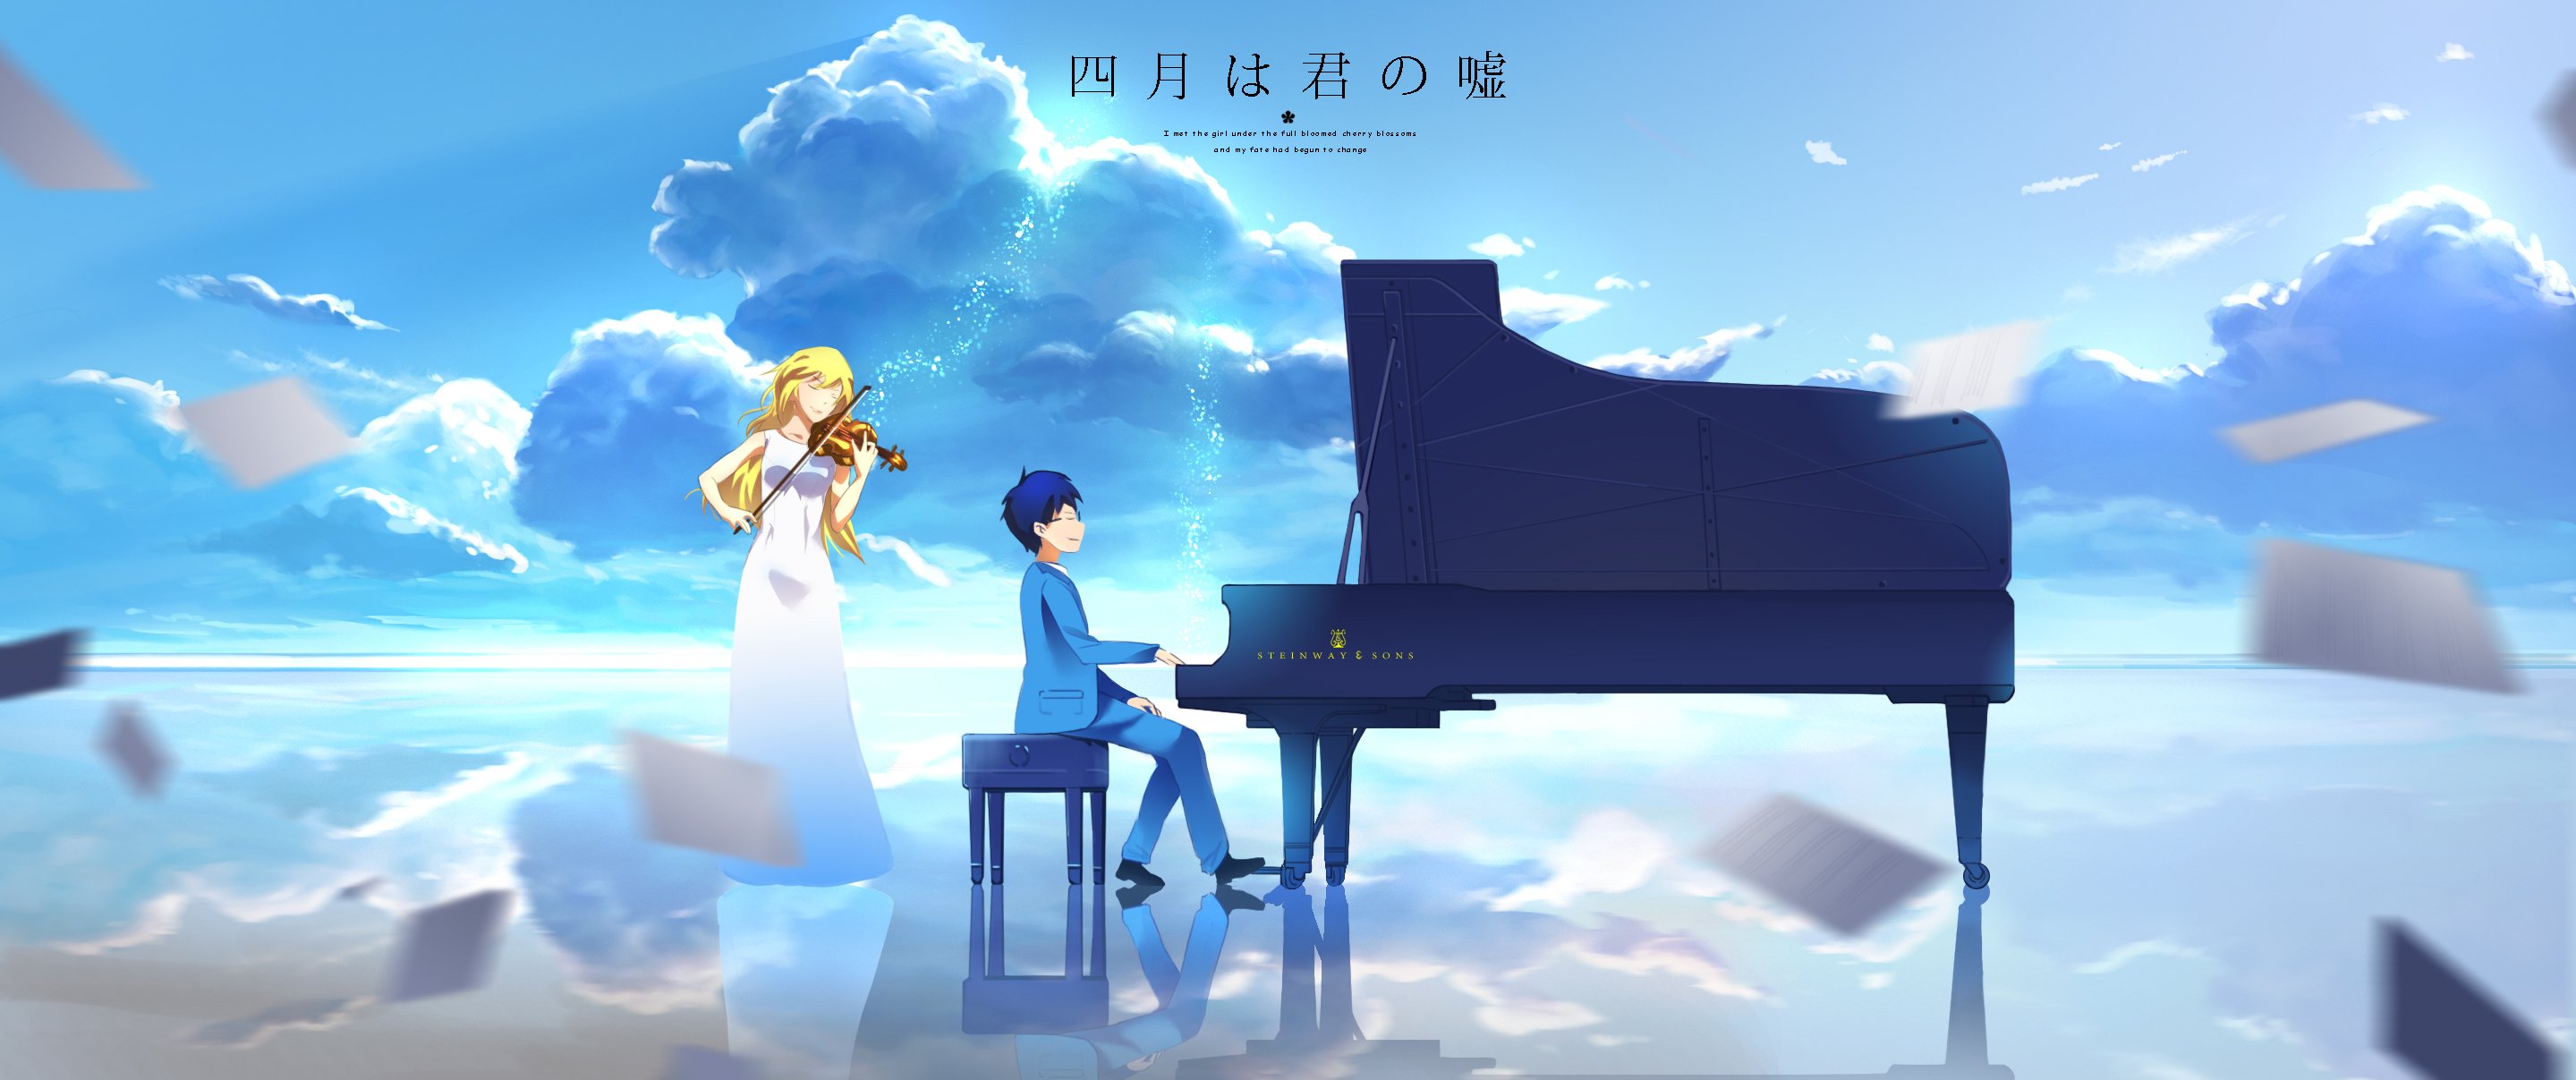 Your Lie In April Wallpapers on WallpaperGet.